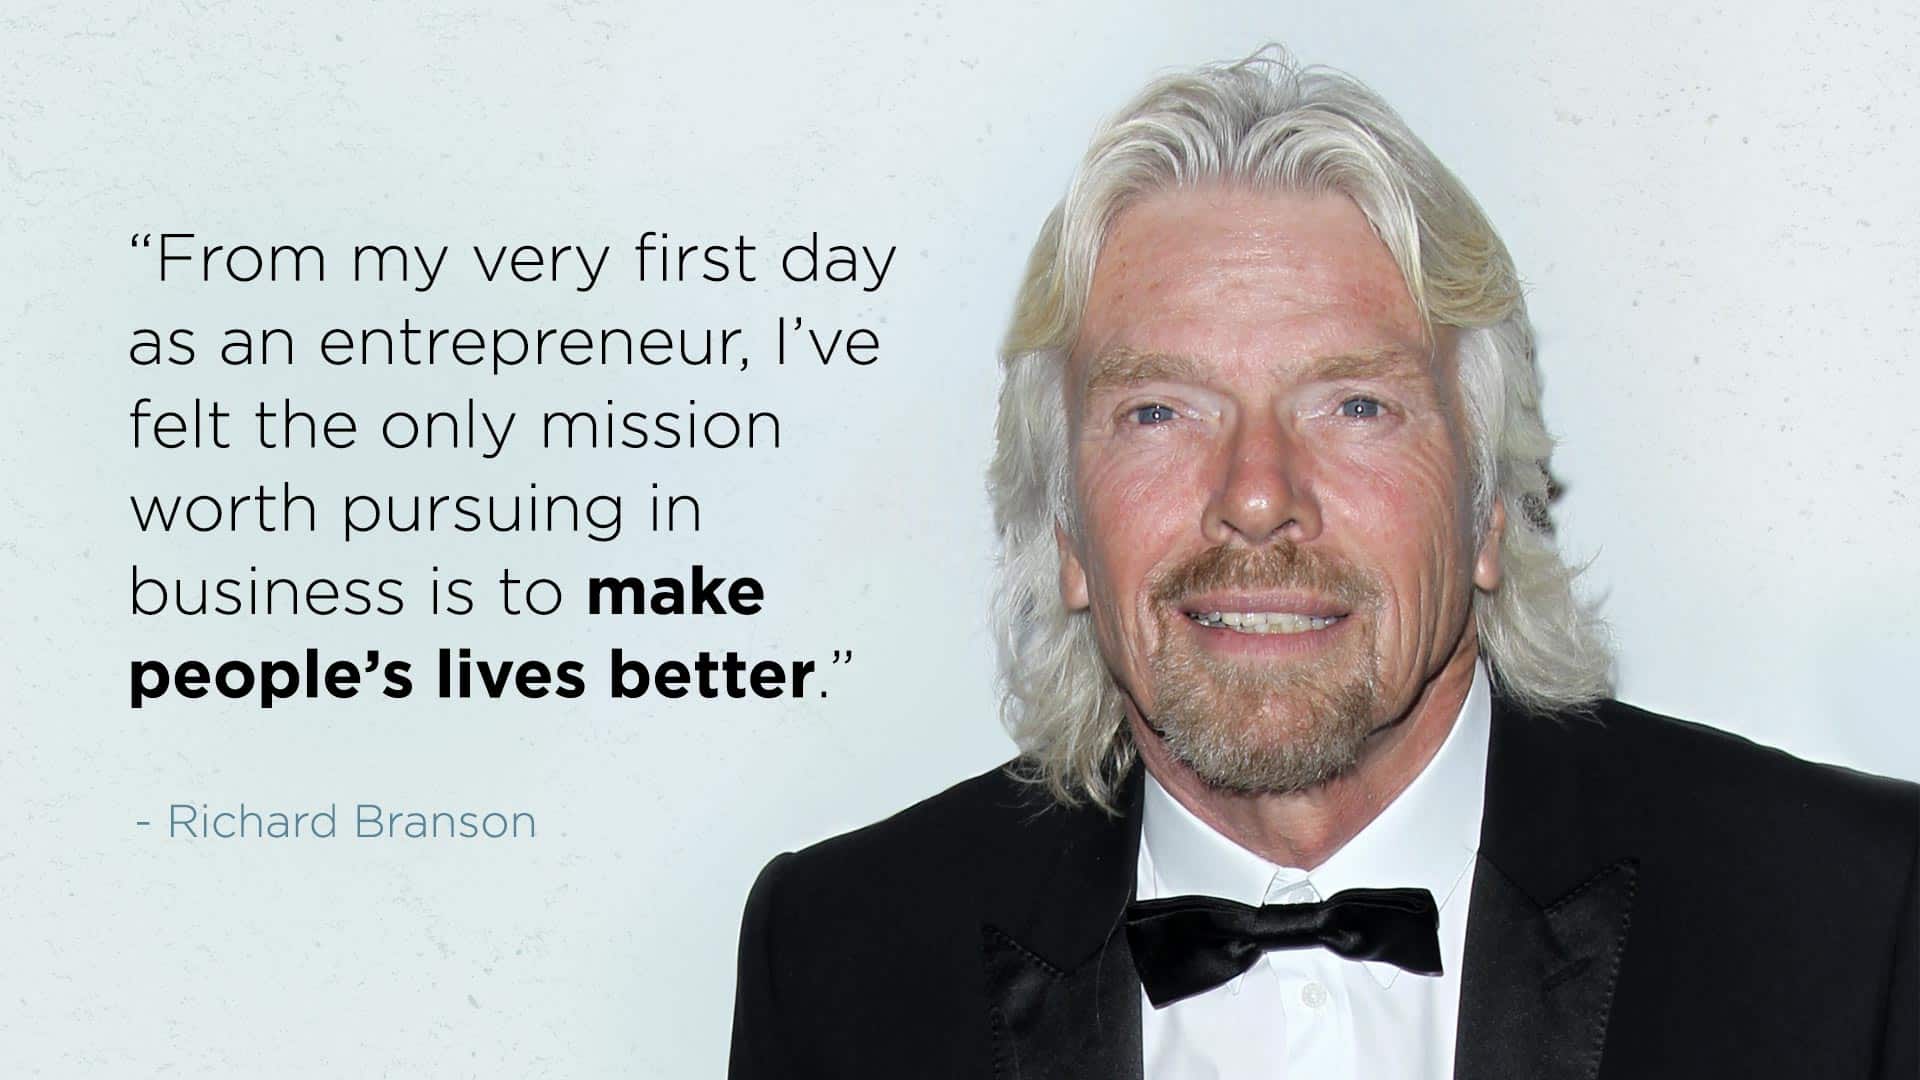 Richard Branson quote about better lives